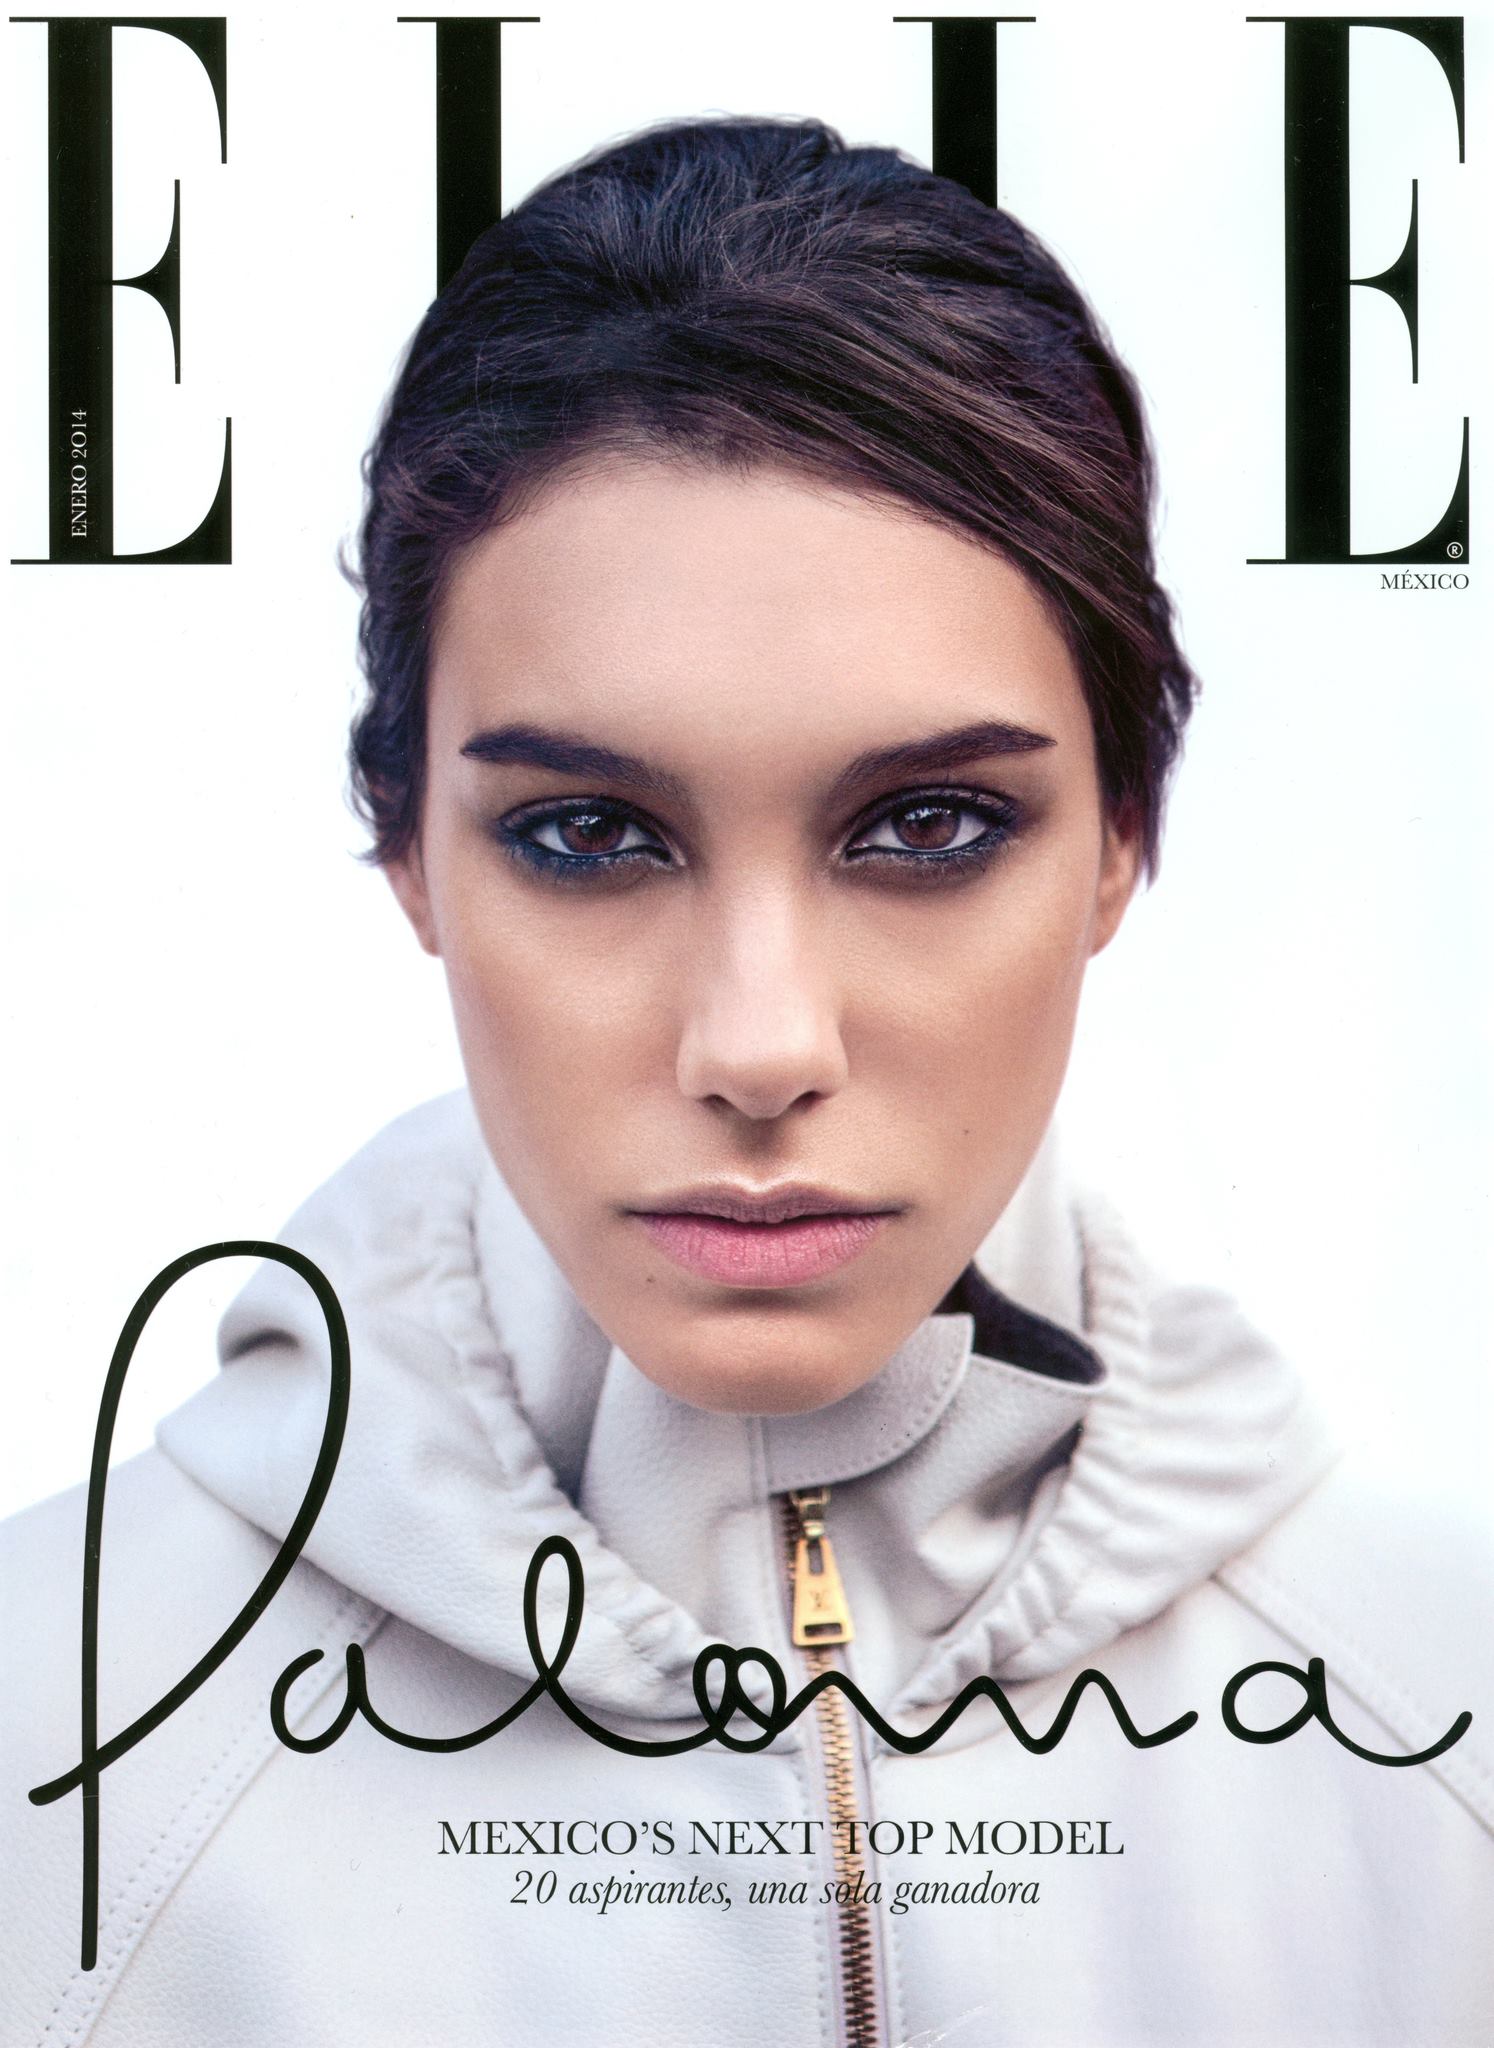 Mexican Models Blog: Paloma Aguilar on the cover of Elle Mexico